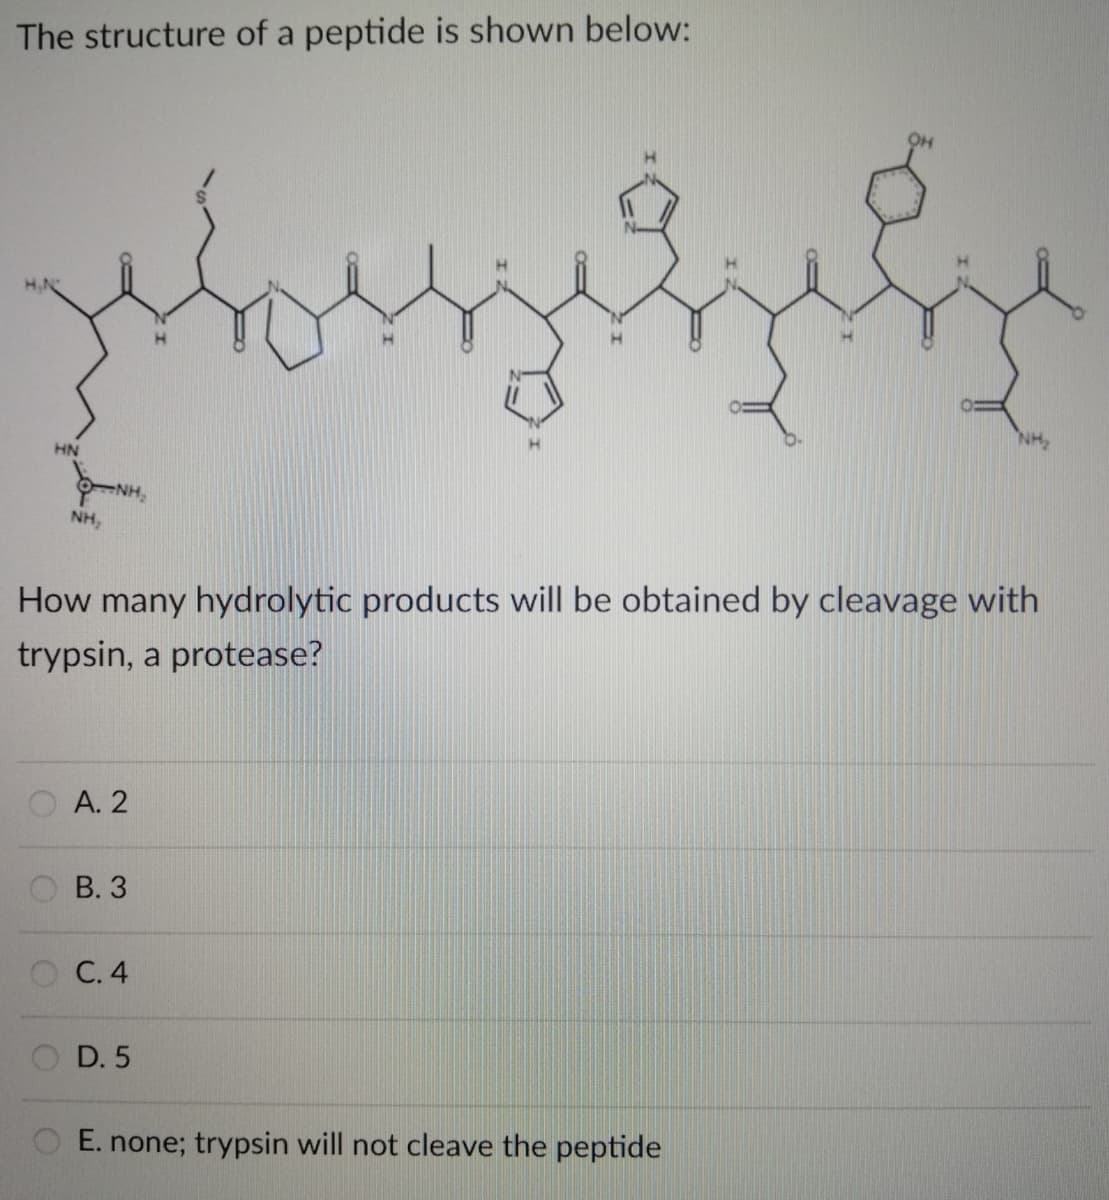 The structure of a peptide is shown below:
OH
HN
NH,
How many hydrolytic products will be obtained by cleavage with
trypsin, a protease?
А. 2
В. 3
О С.4
O D. 5
E. none; trypsin will not cleave the peptide
